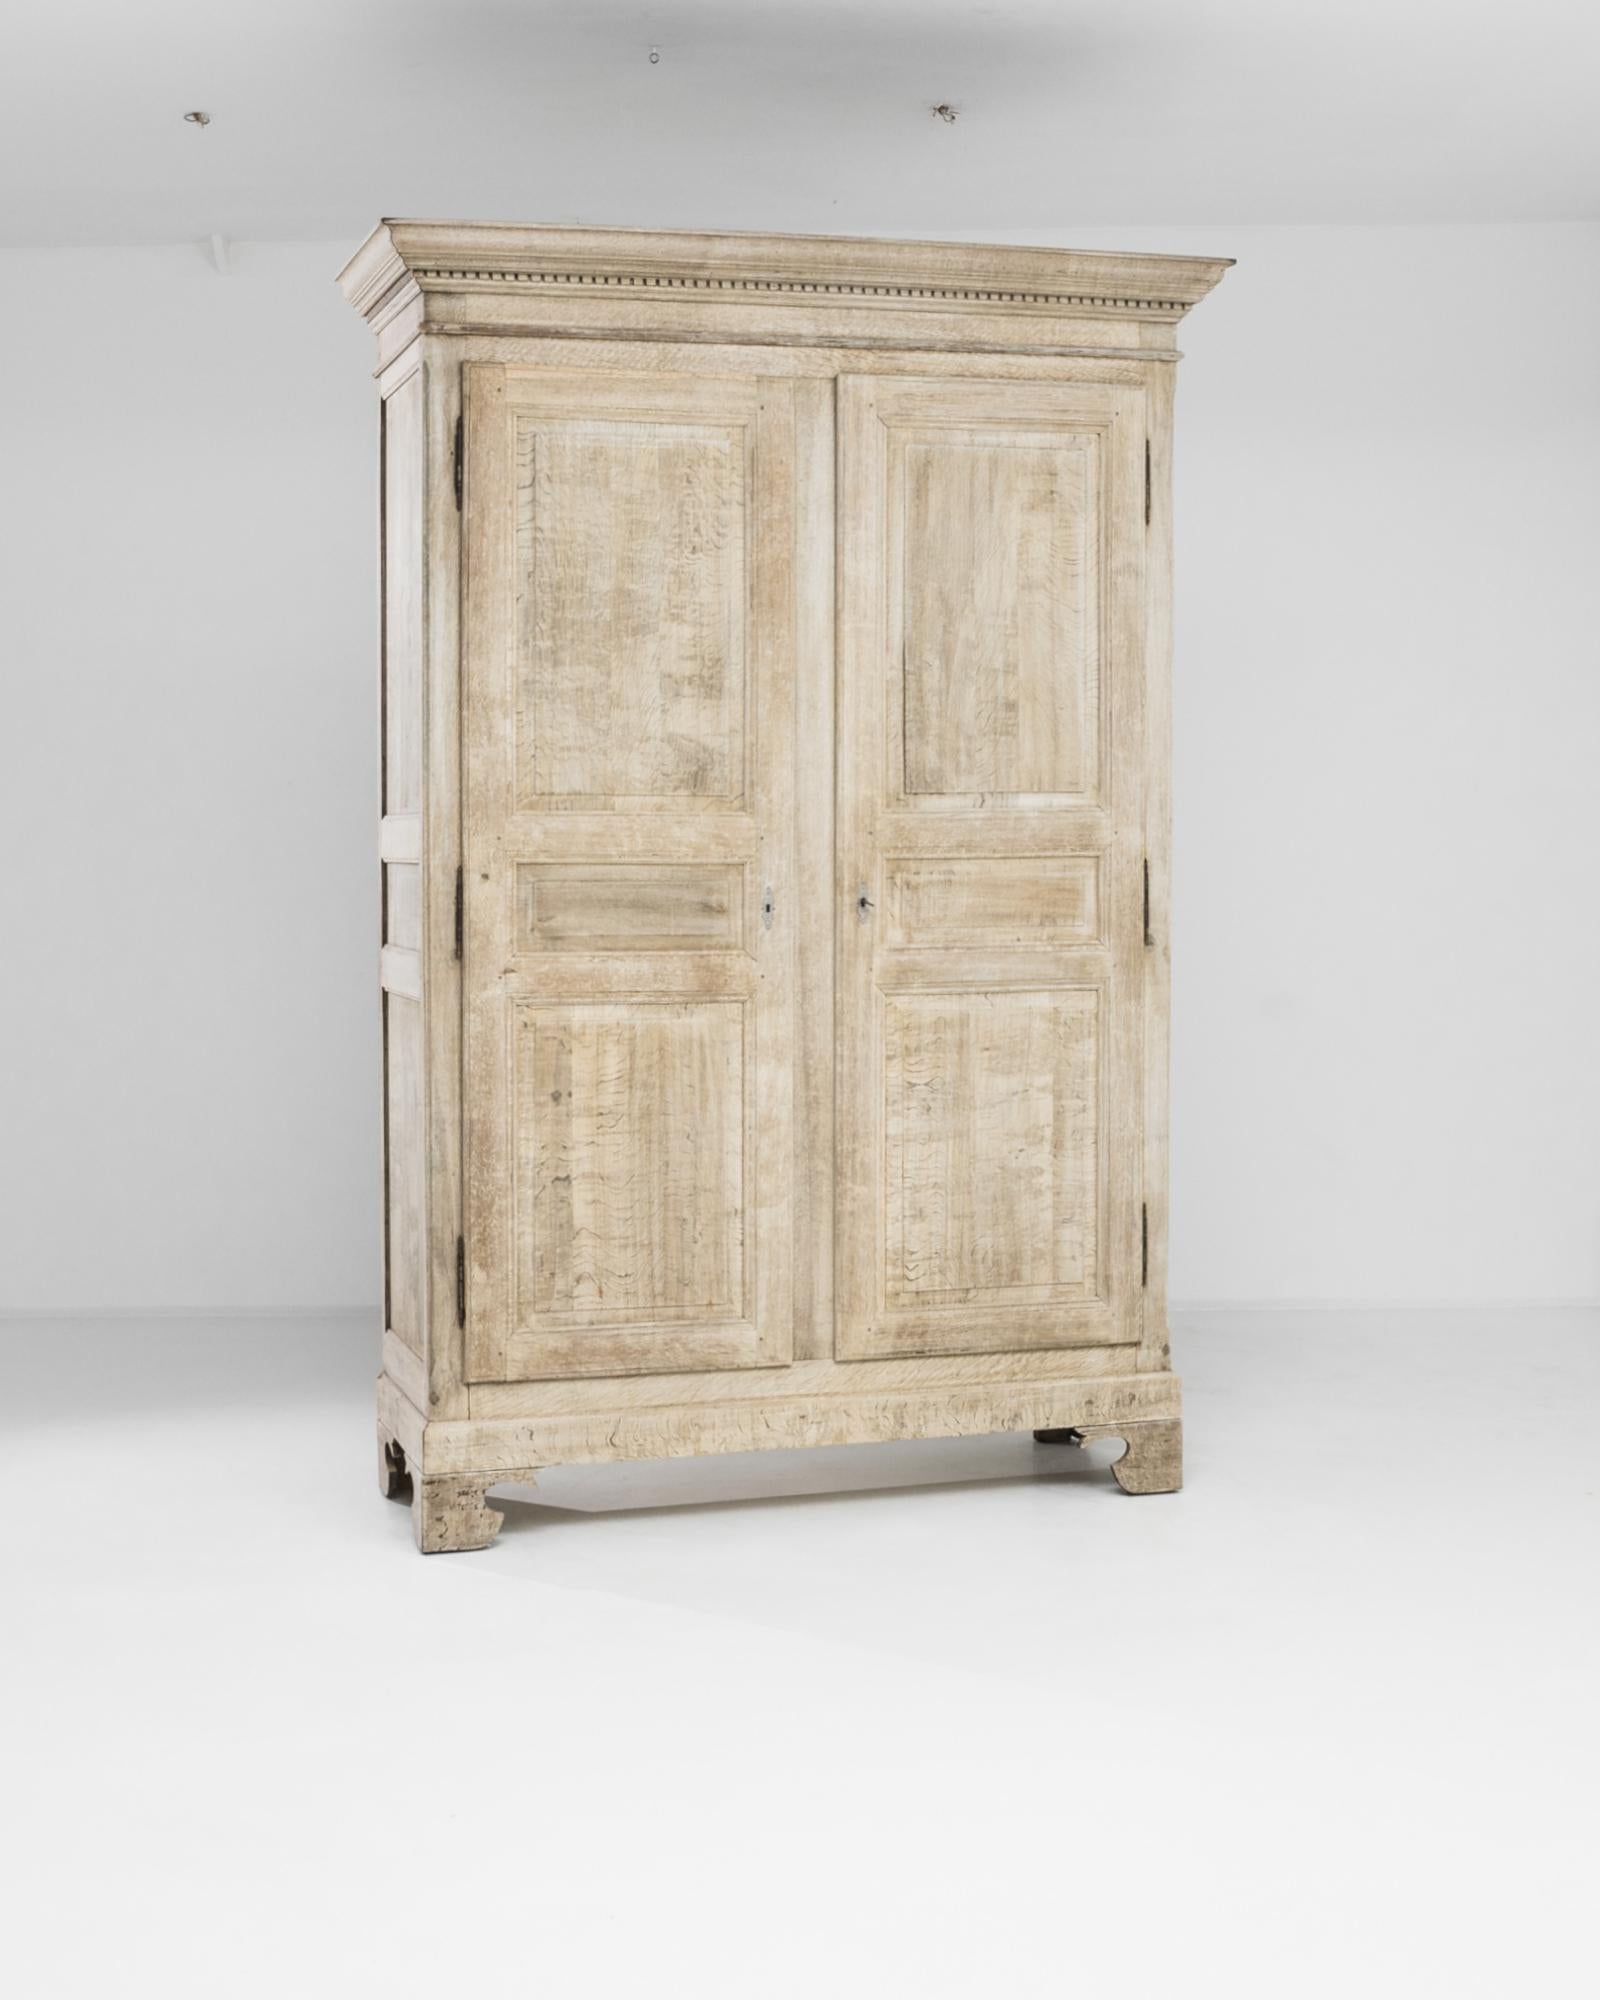 A bleached oak cabinet from France, produced circa 1860. A titan of a chest, standing just over eight feet tall, this antique double door cabinet features a cavity of four shelves held off the ground on four short corner feet, secured with metal